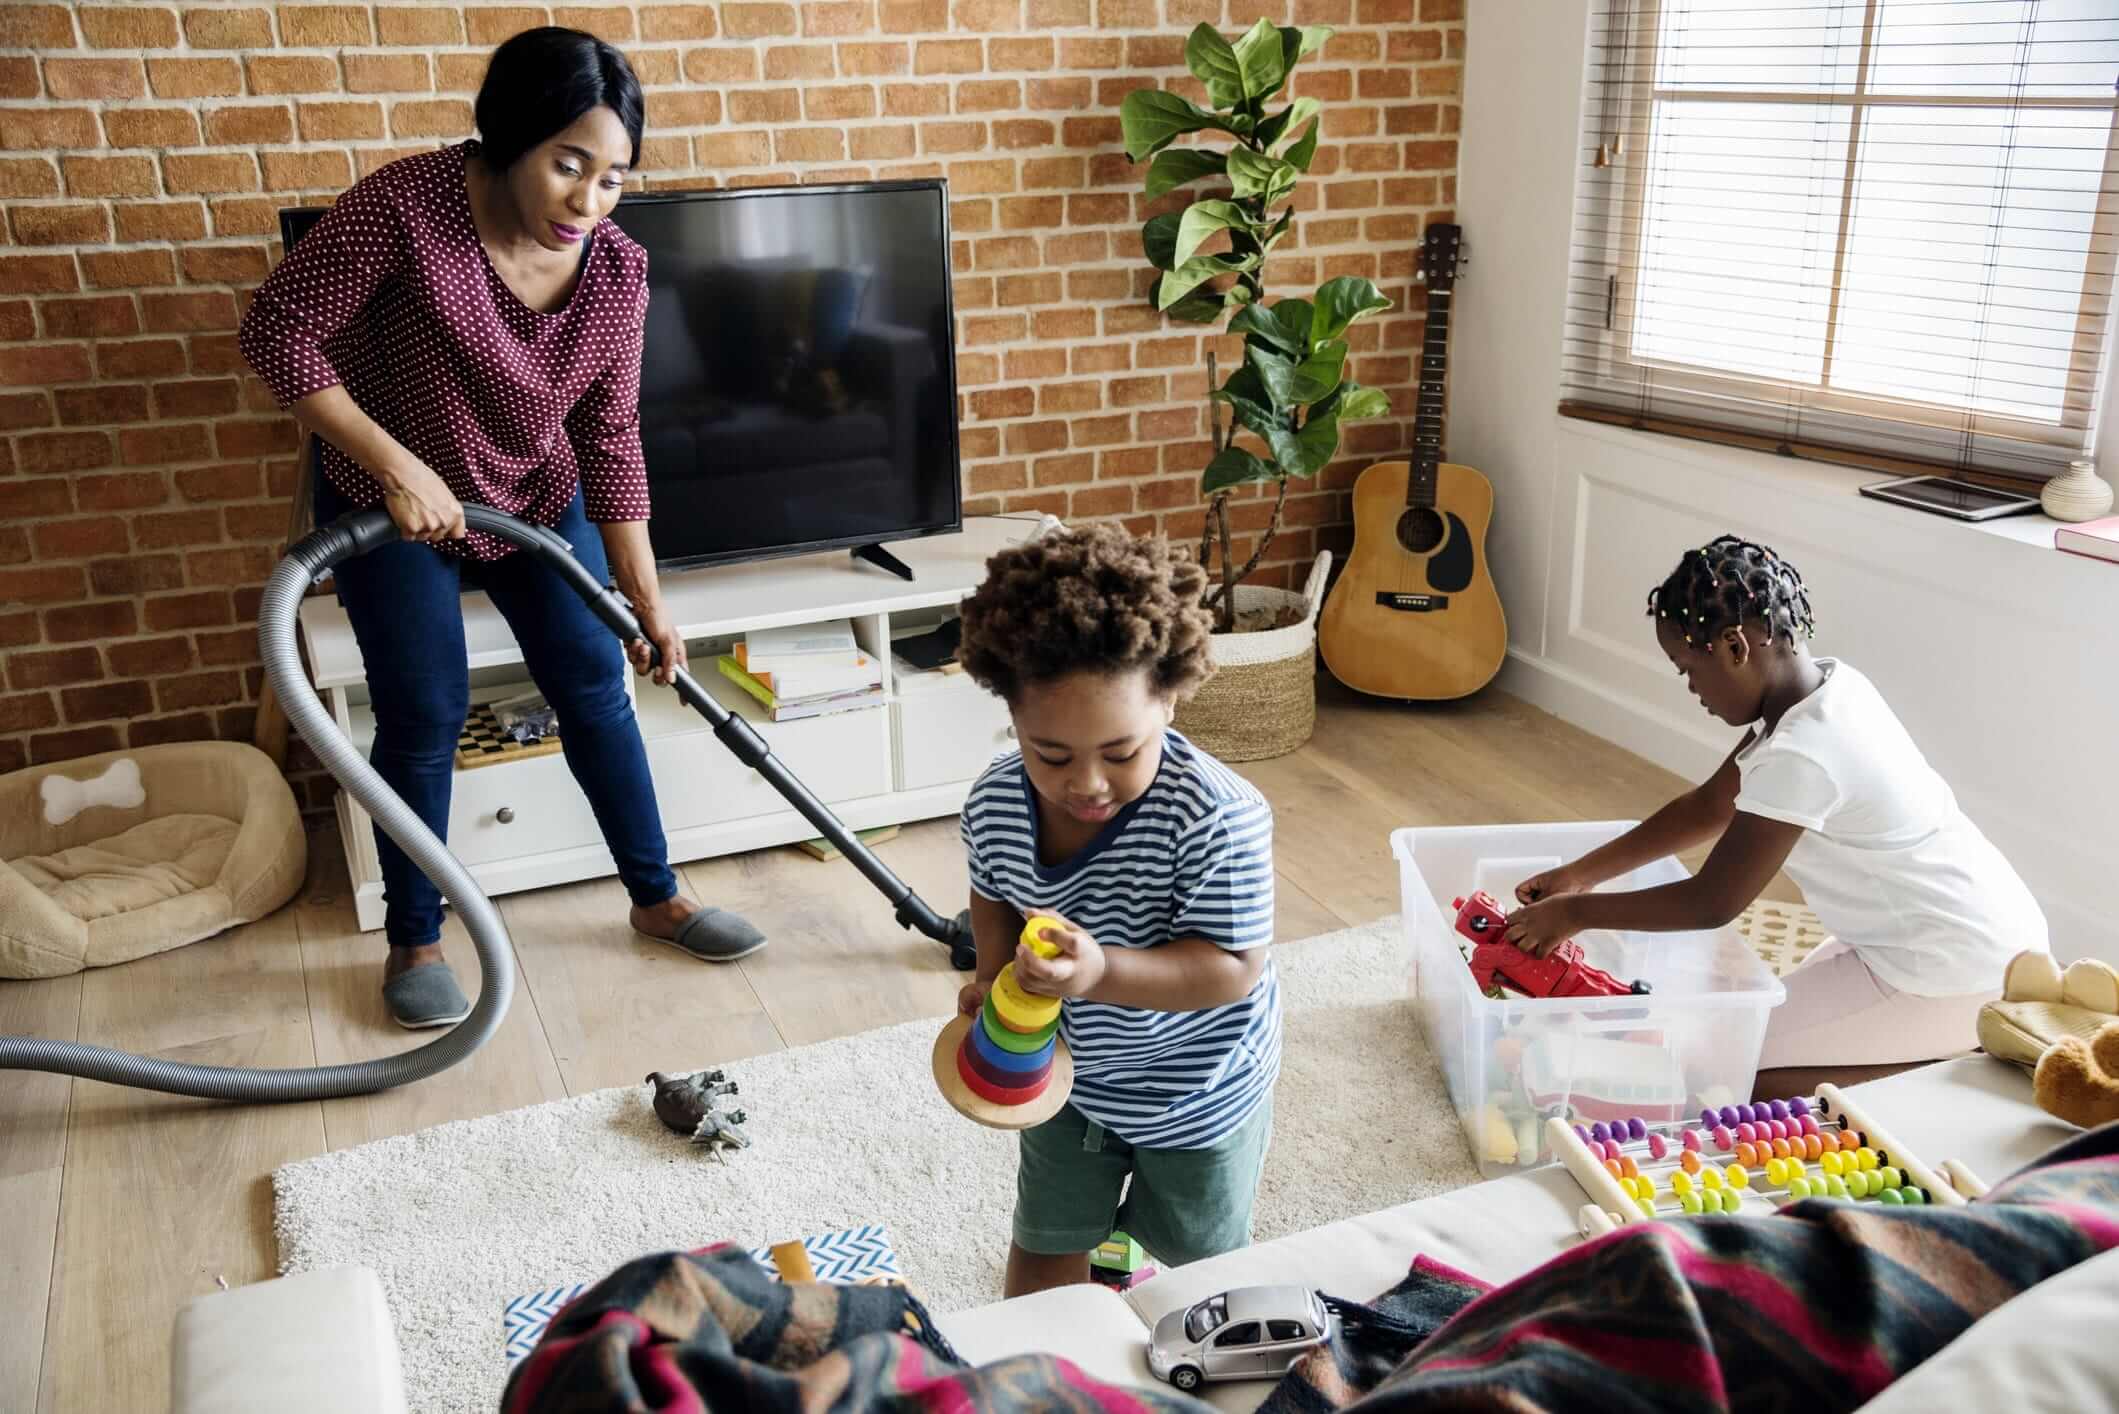 Spring Cleaning and Its Impact on Home Comfort and Spring Allergies